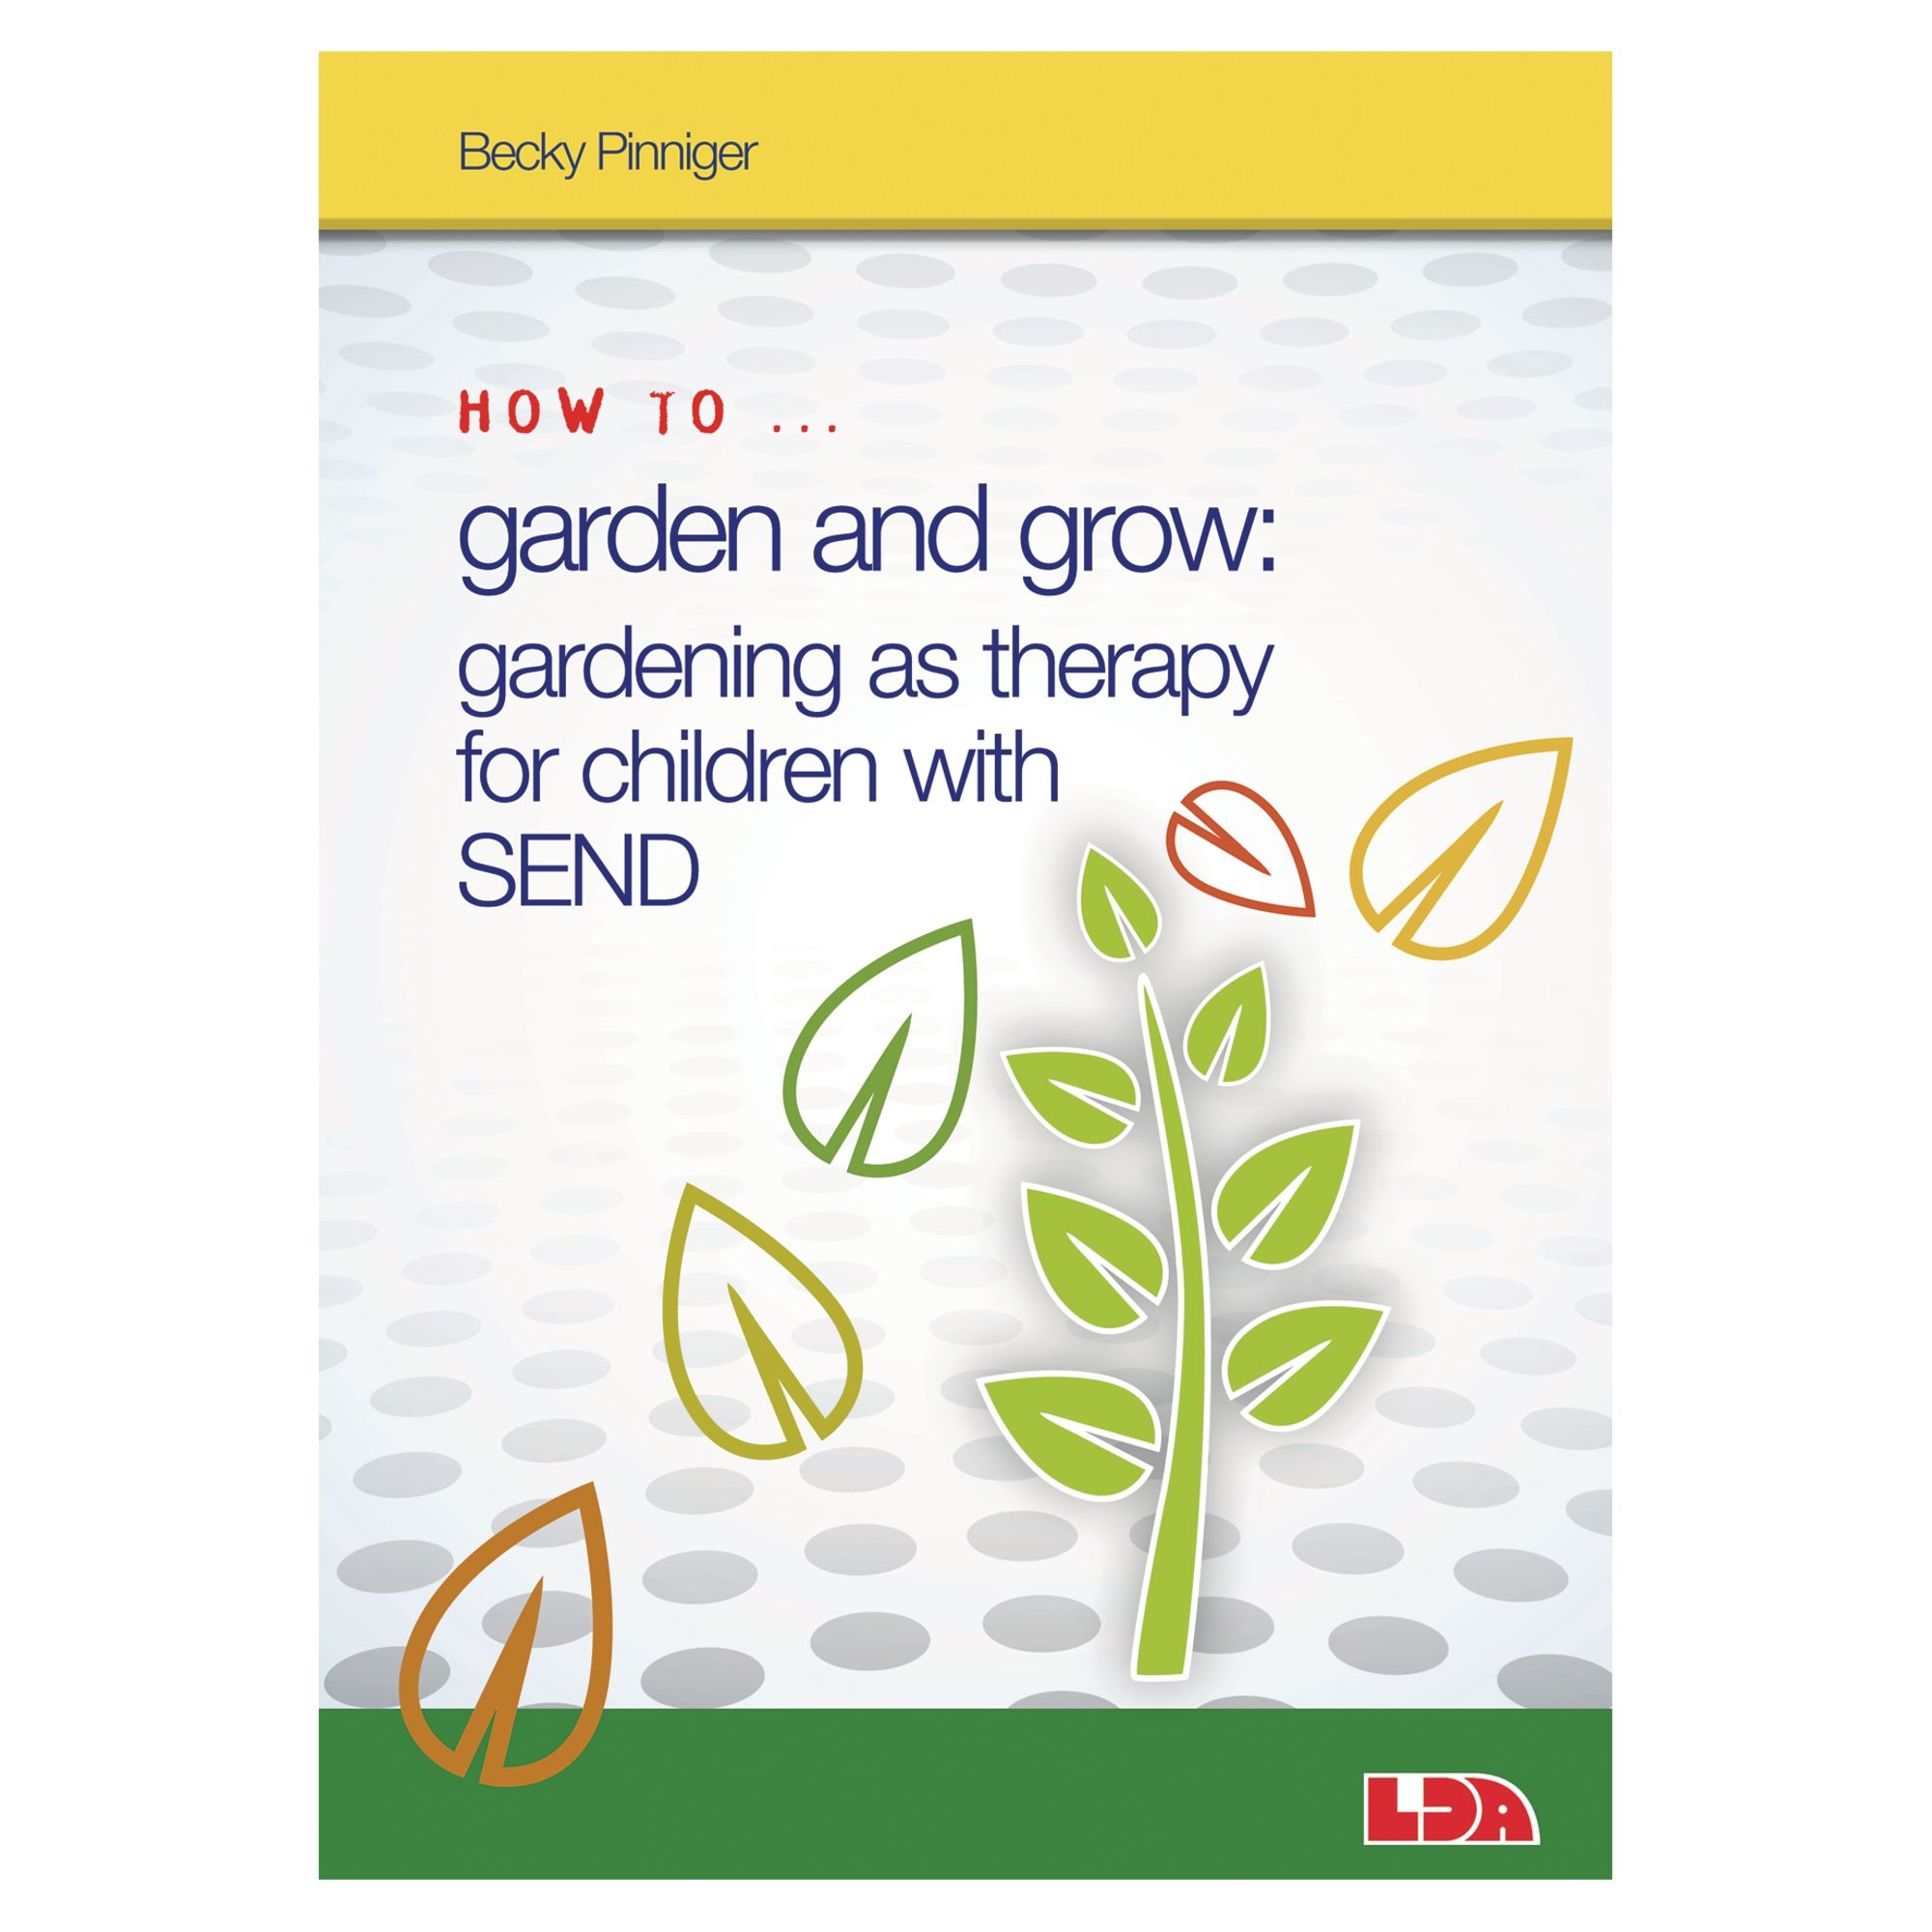 How to Garden and Grow with Children with SEND